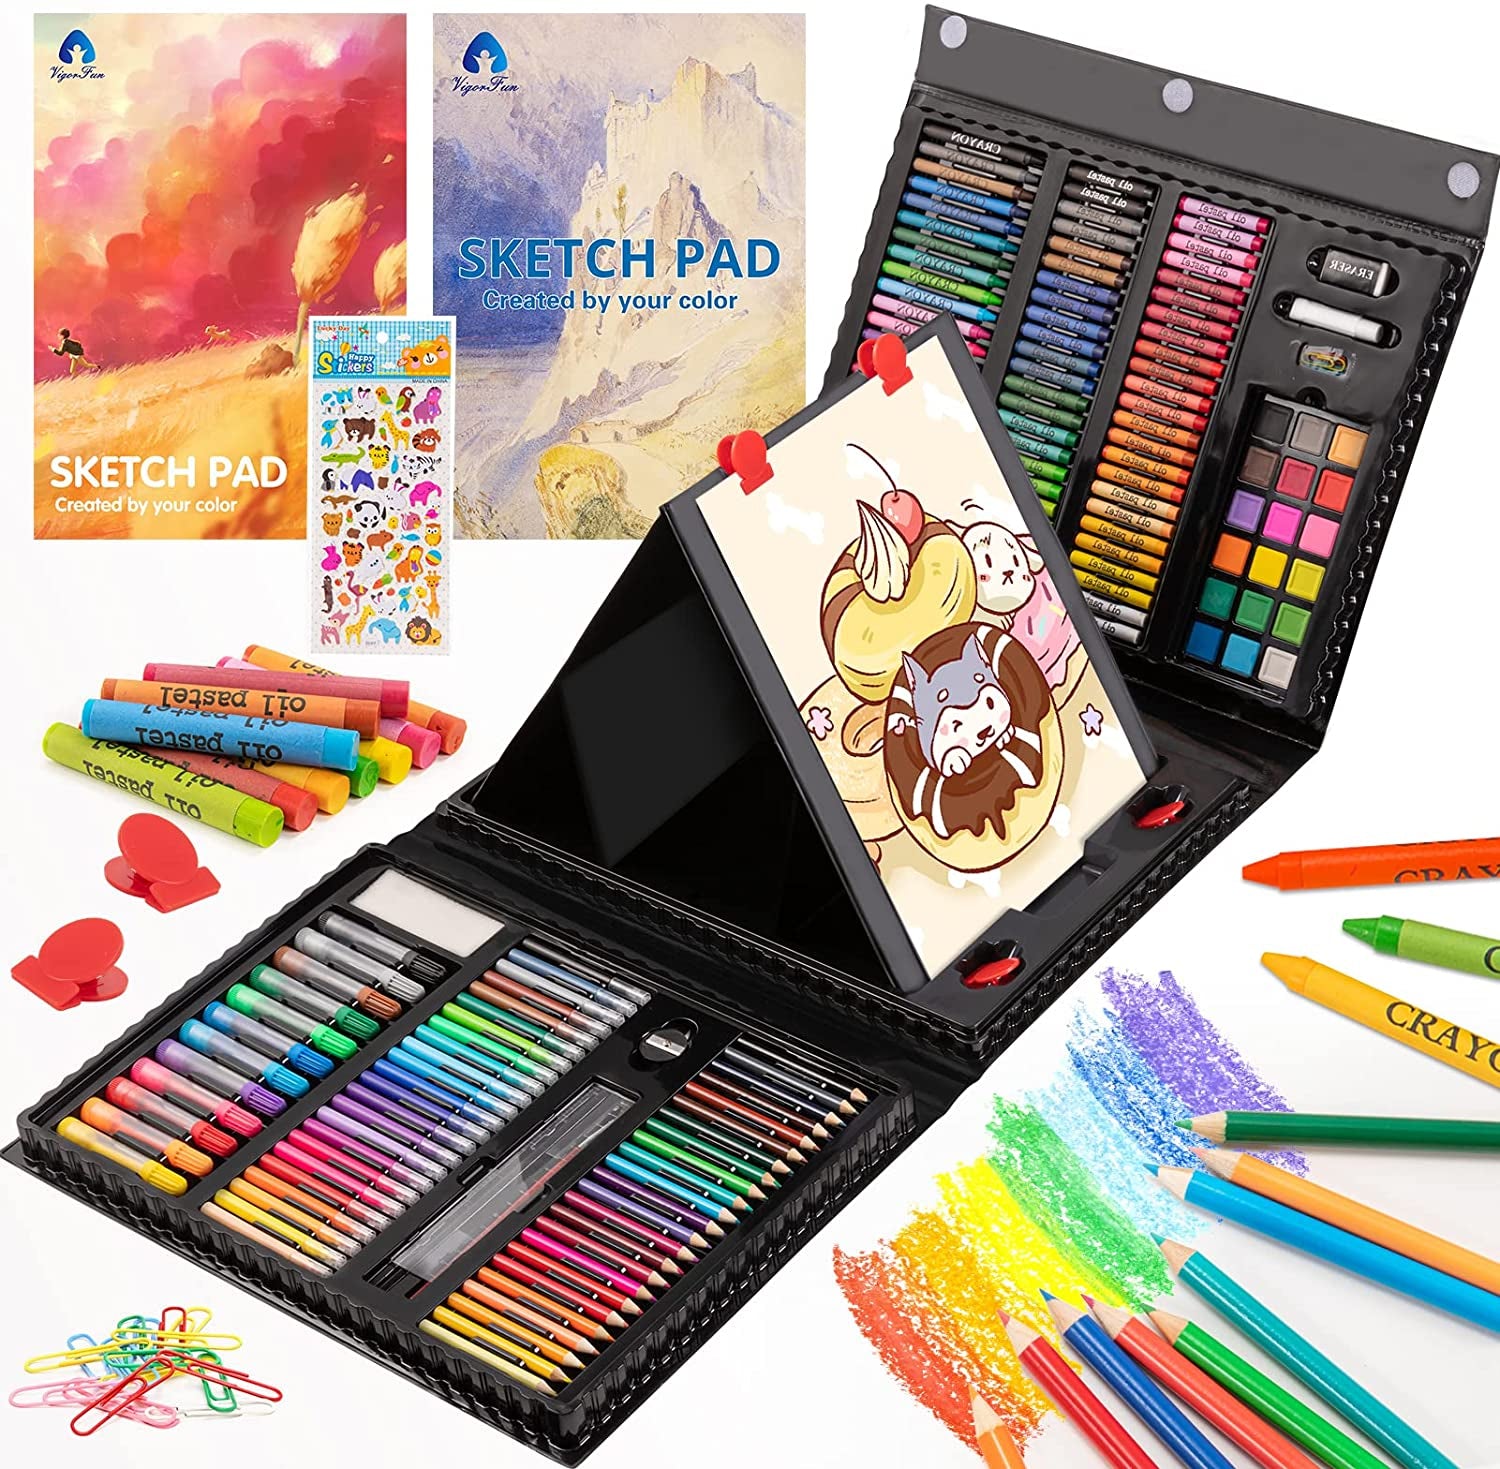 Art Supplies, 240-Piece Drawing Art Kit, Gifts Art Set Case with Double Sided Trifold Easel, Includes Oil Pastels, Crayons, Colored Pencils, Watercolor Cakes, Sketch Pad (Black)